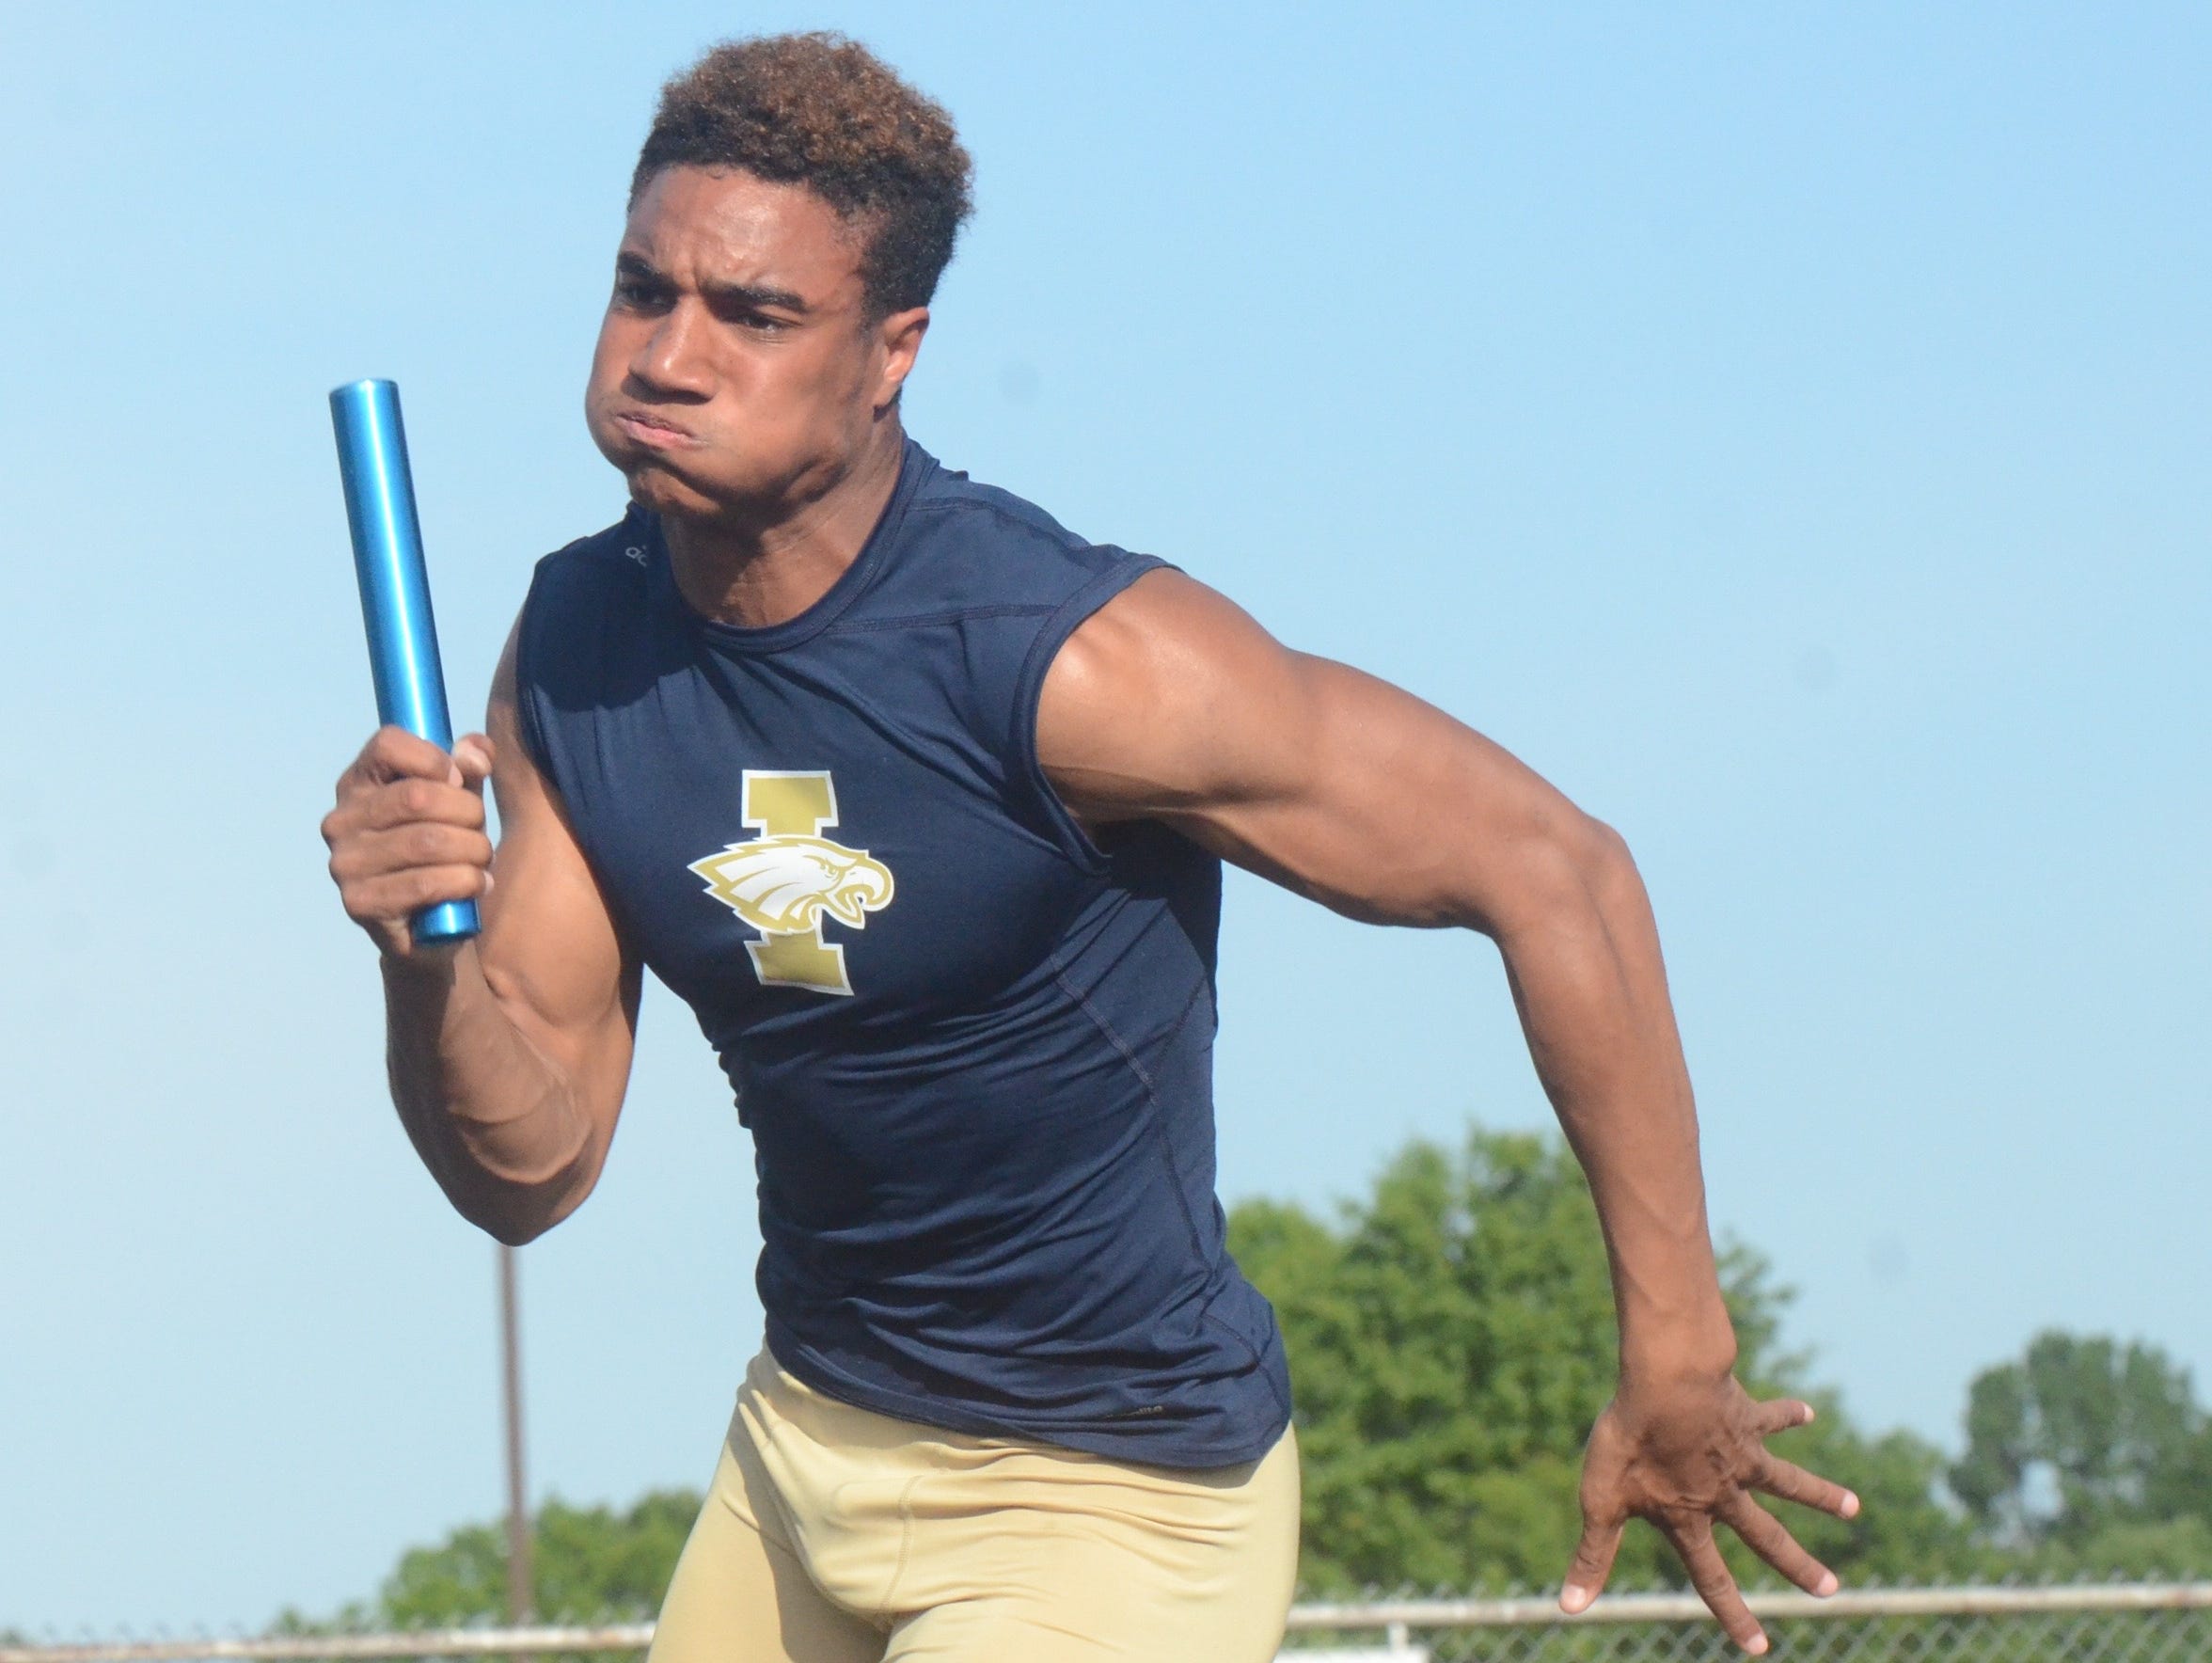 Independence senior Nate Johnson will compete in four events at this week's TSSAA Track State Championships